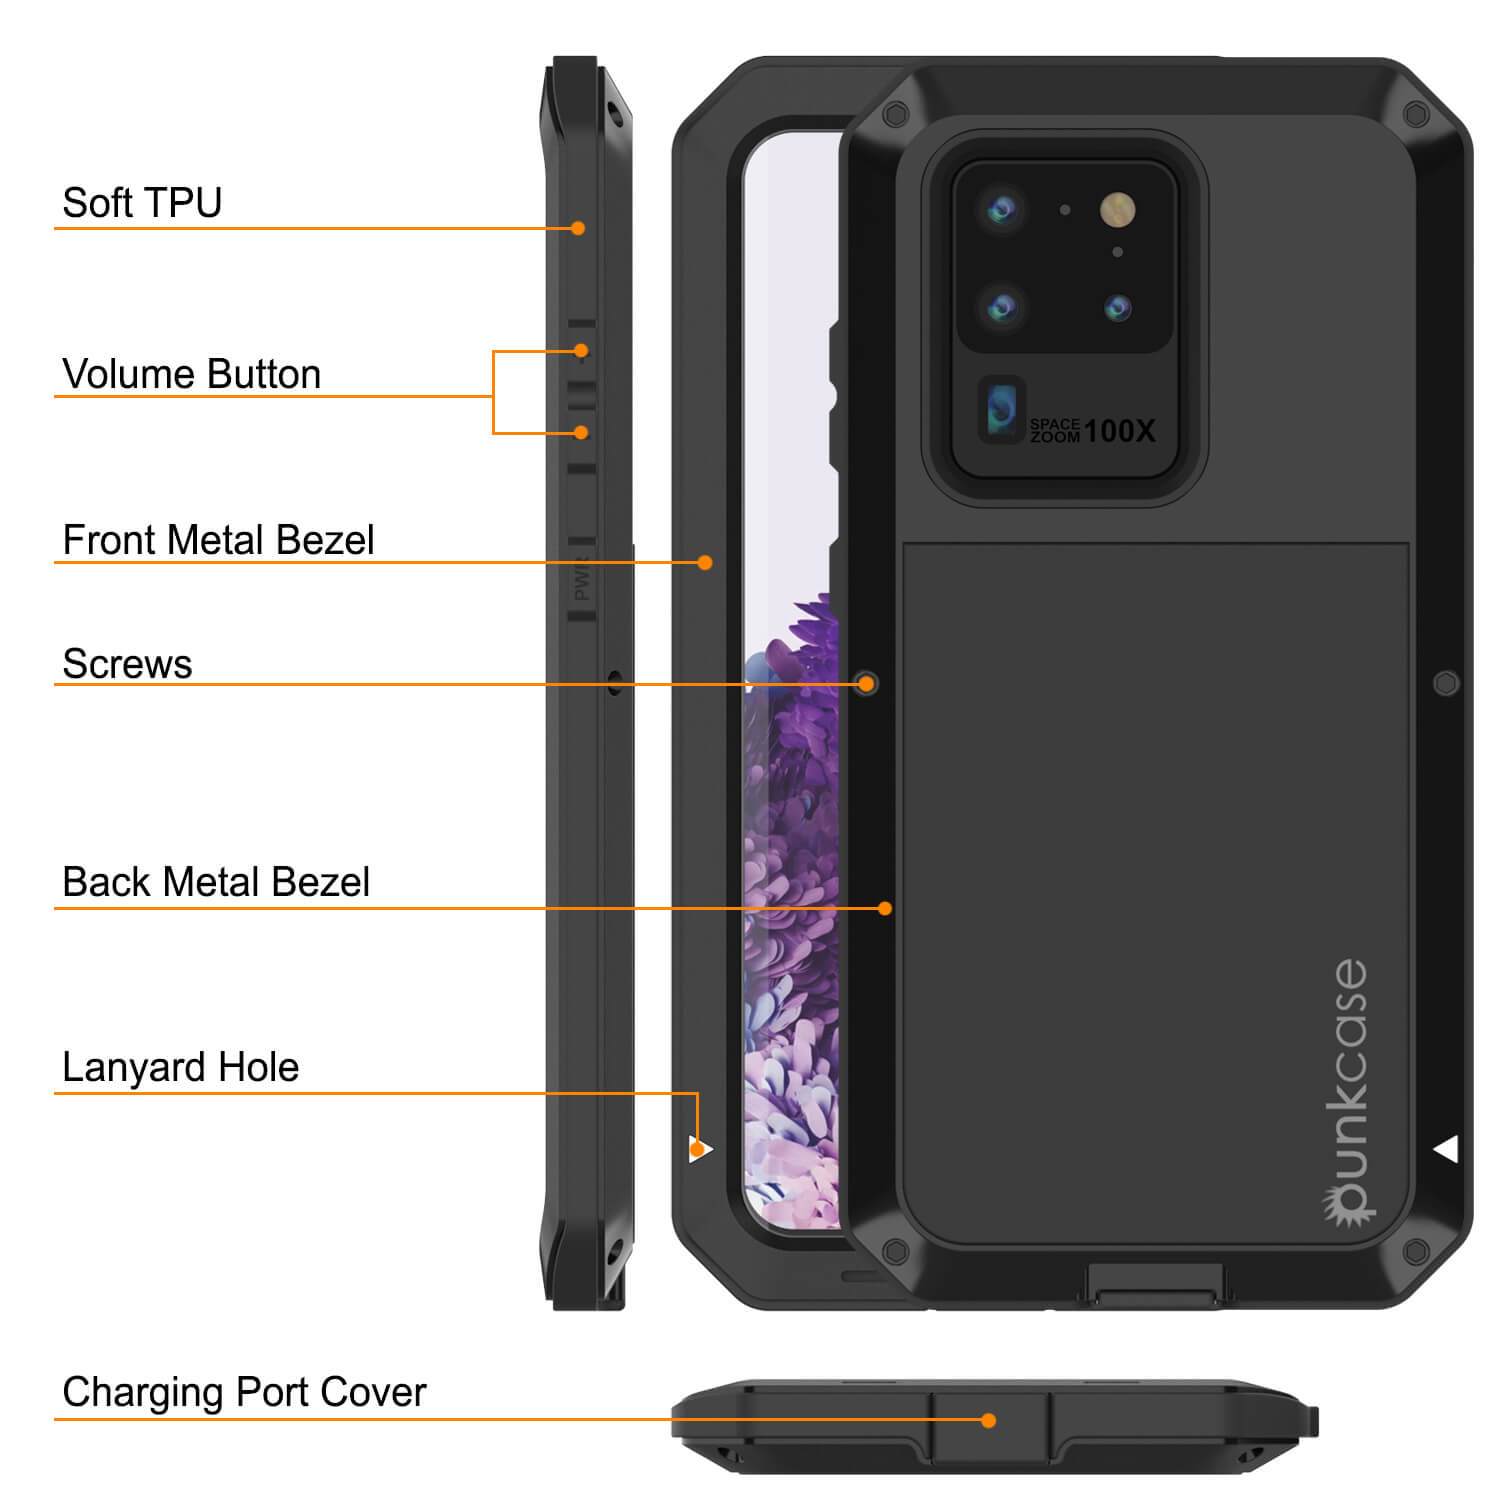 Punkcase Galaxy S22 Ultra Case [Spartan 2.0] Clear Rugged Heavy Duty Cover | Ultra Slim Military Grade Protection w/ Raised Bezel Design for Galaxy